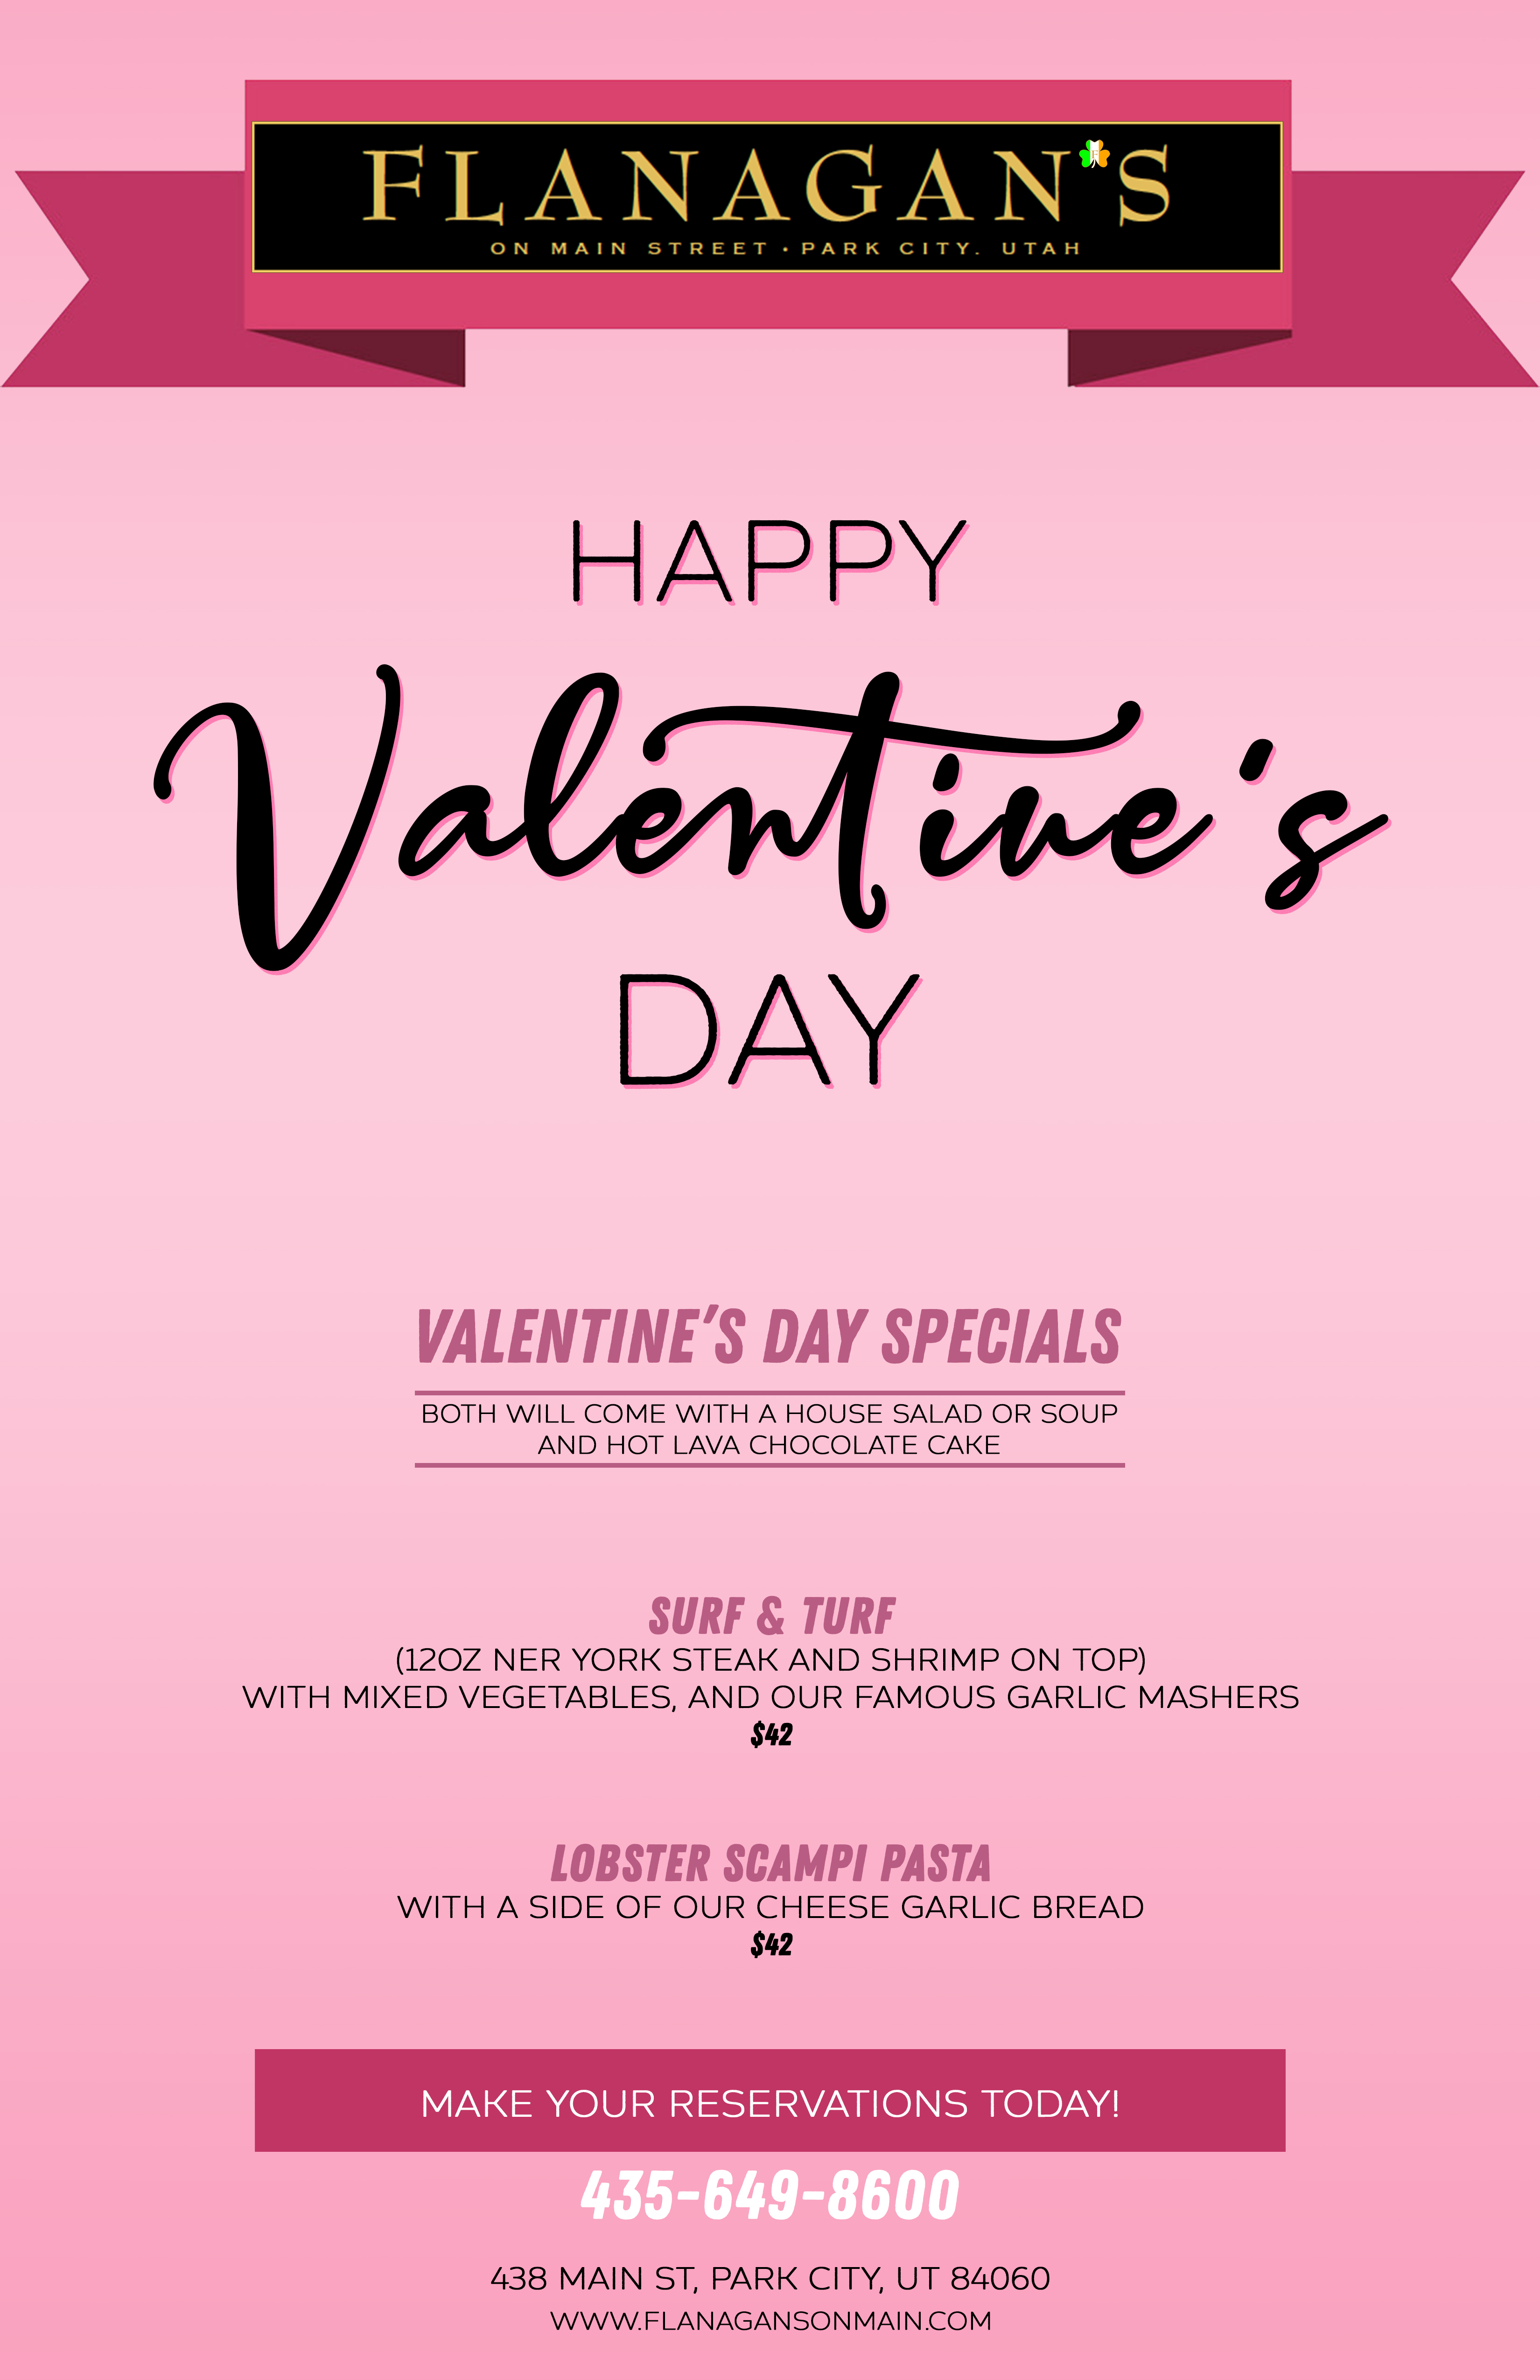 Happy Valentine's Day flyer with specials